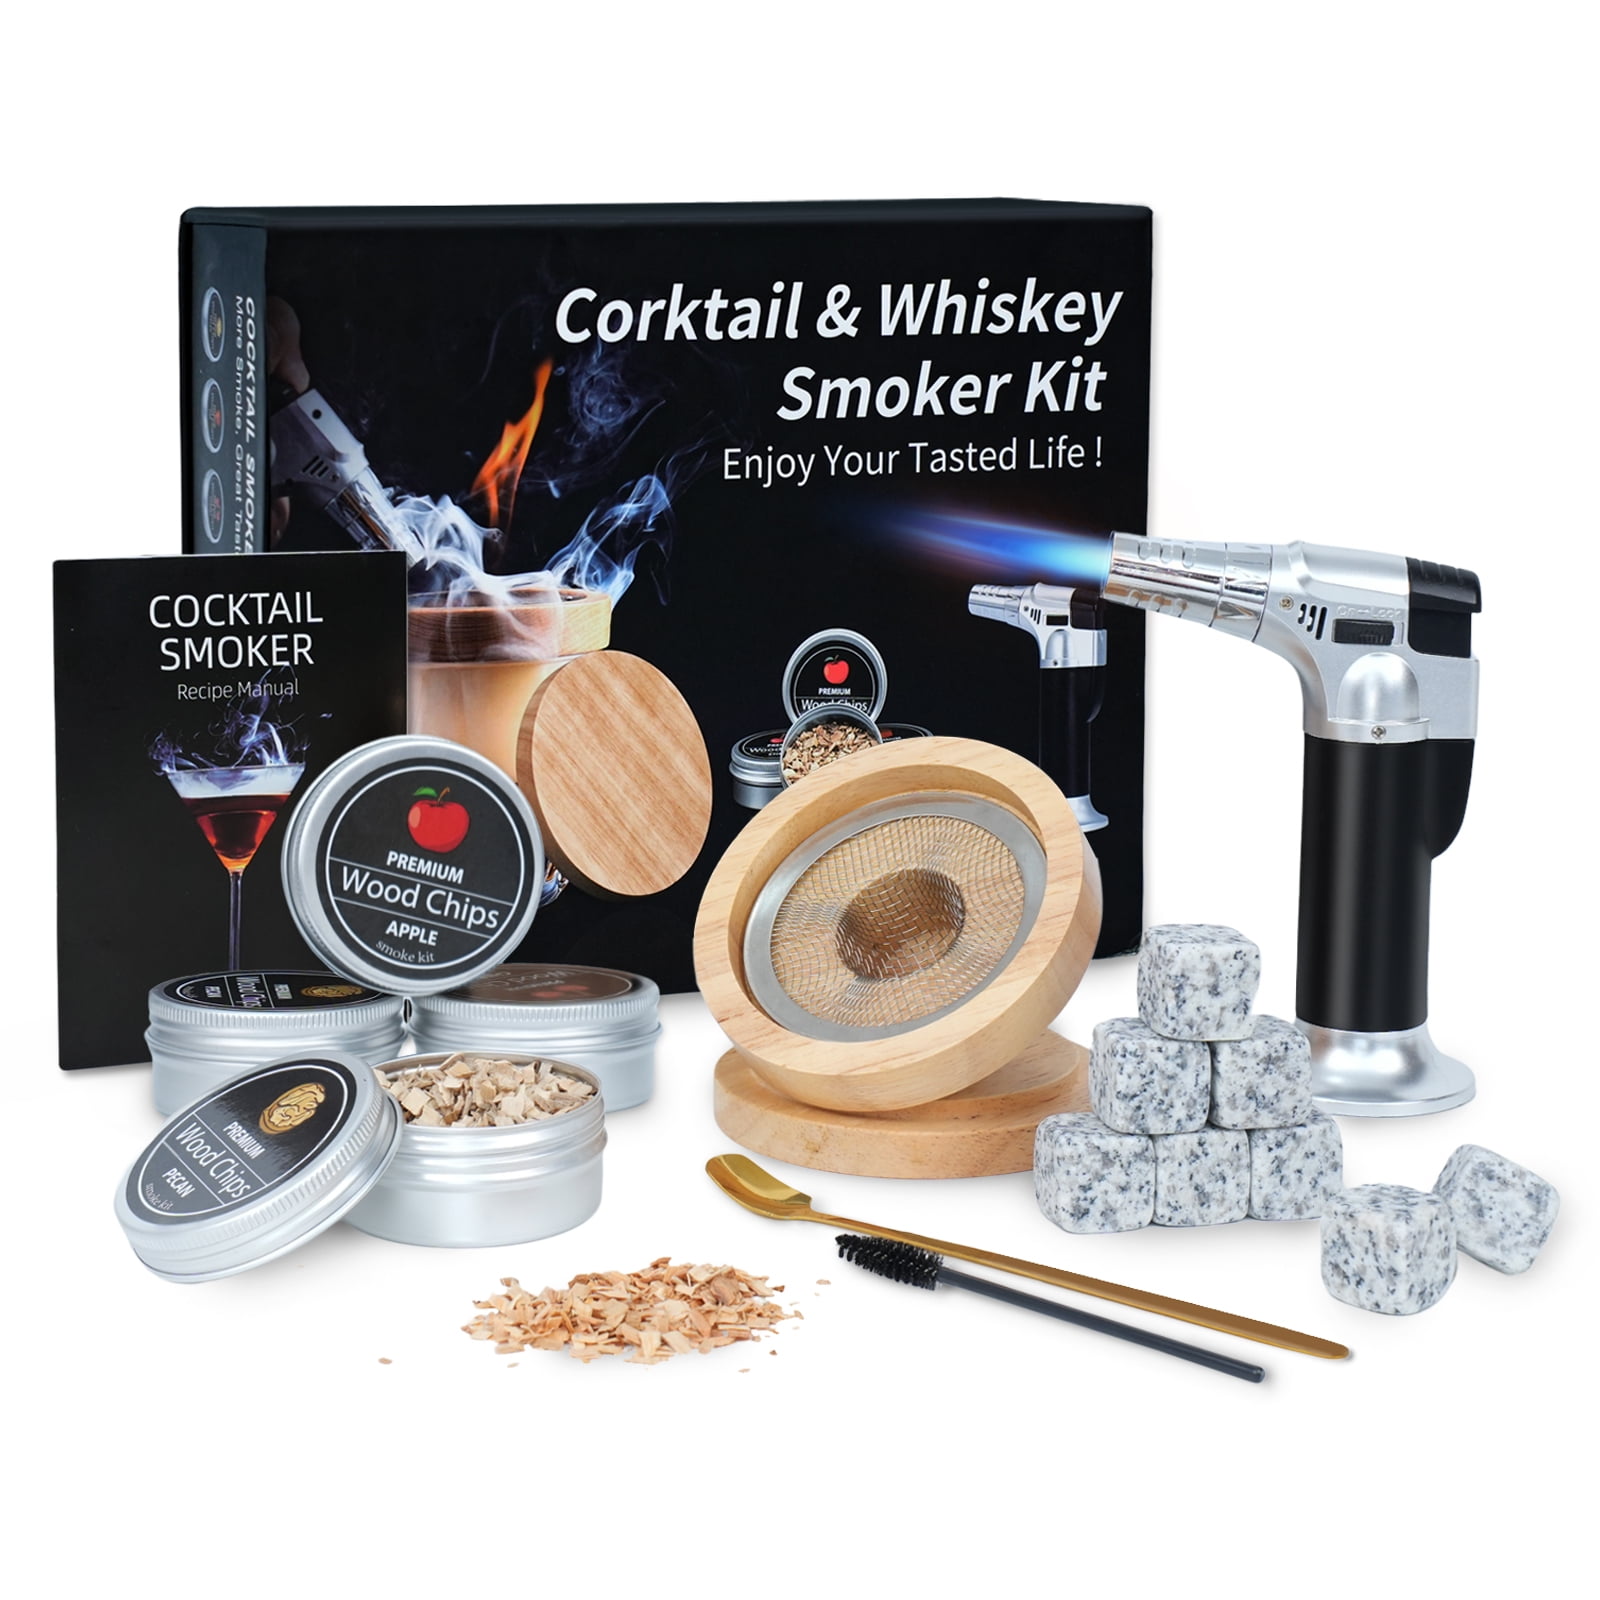 Whiskey Cocktail Smoker Kit, Ogednac Old Fashioned Smoker Kit with Torch, 4 Flavors Wood Chips, Groomsmen Wedding Gifts for Bourbon lovers, Drink